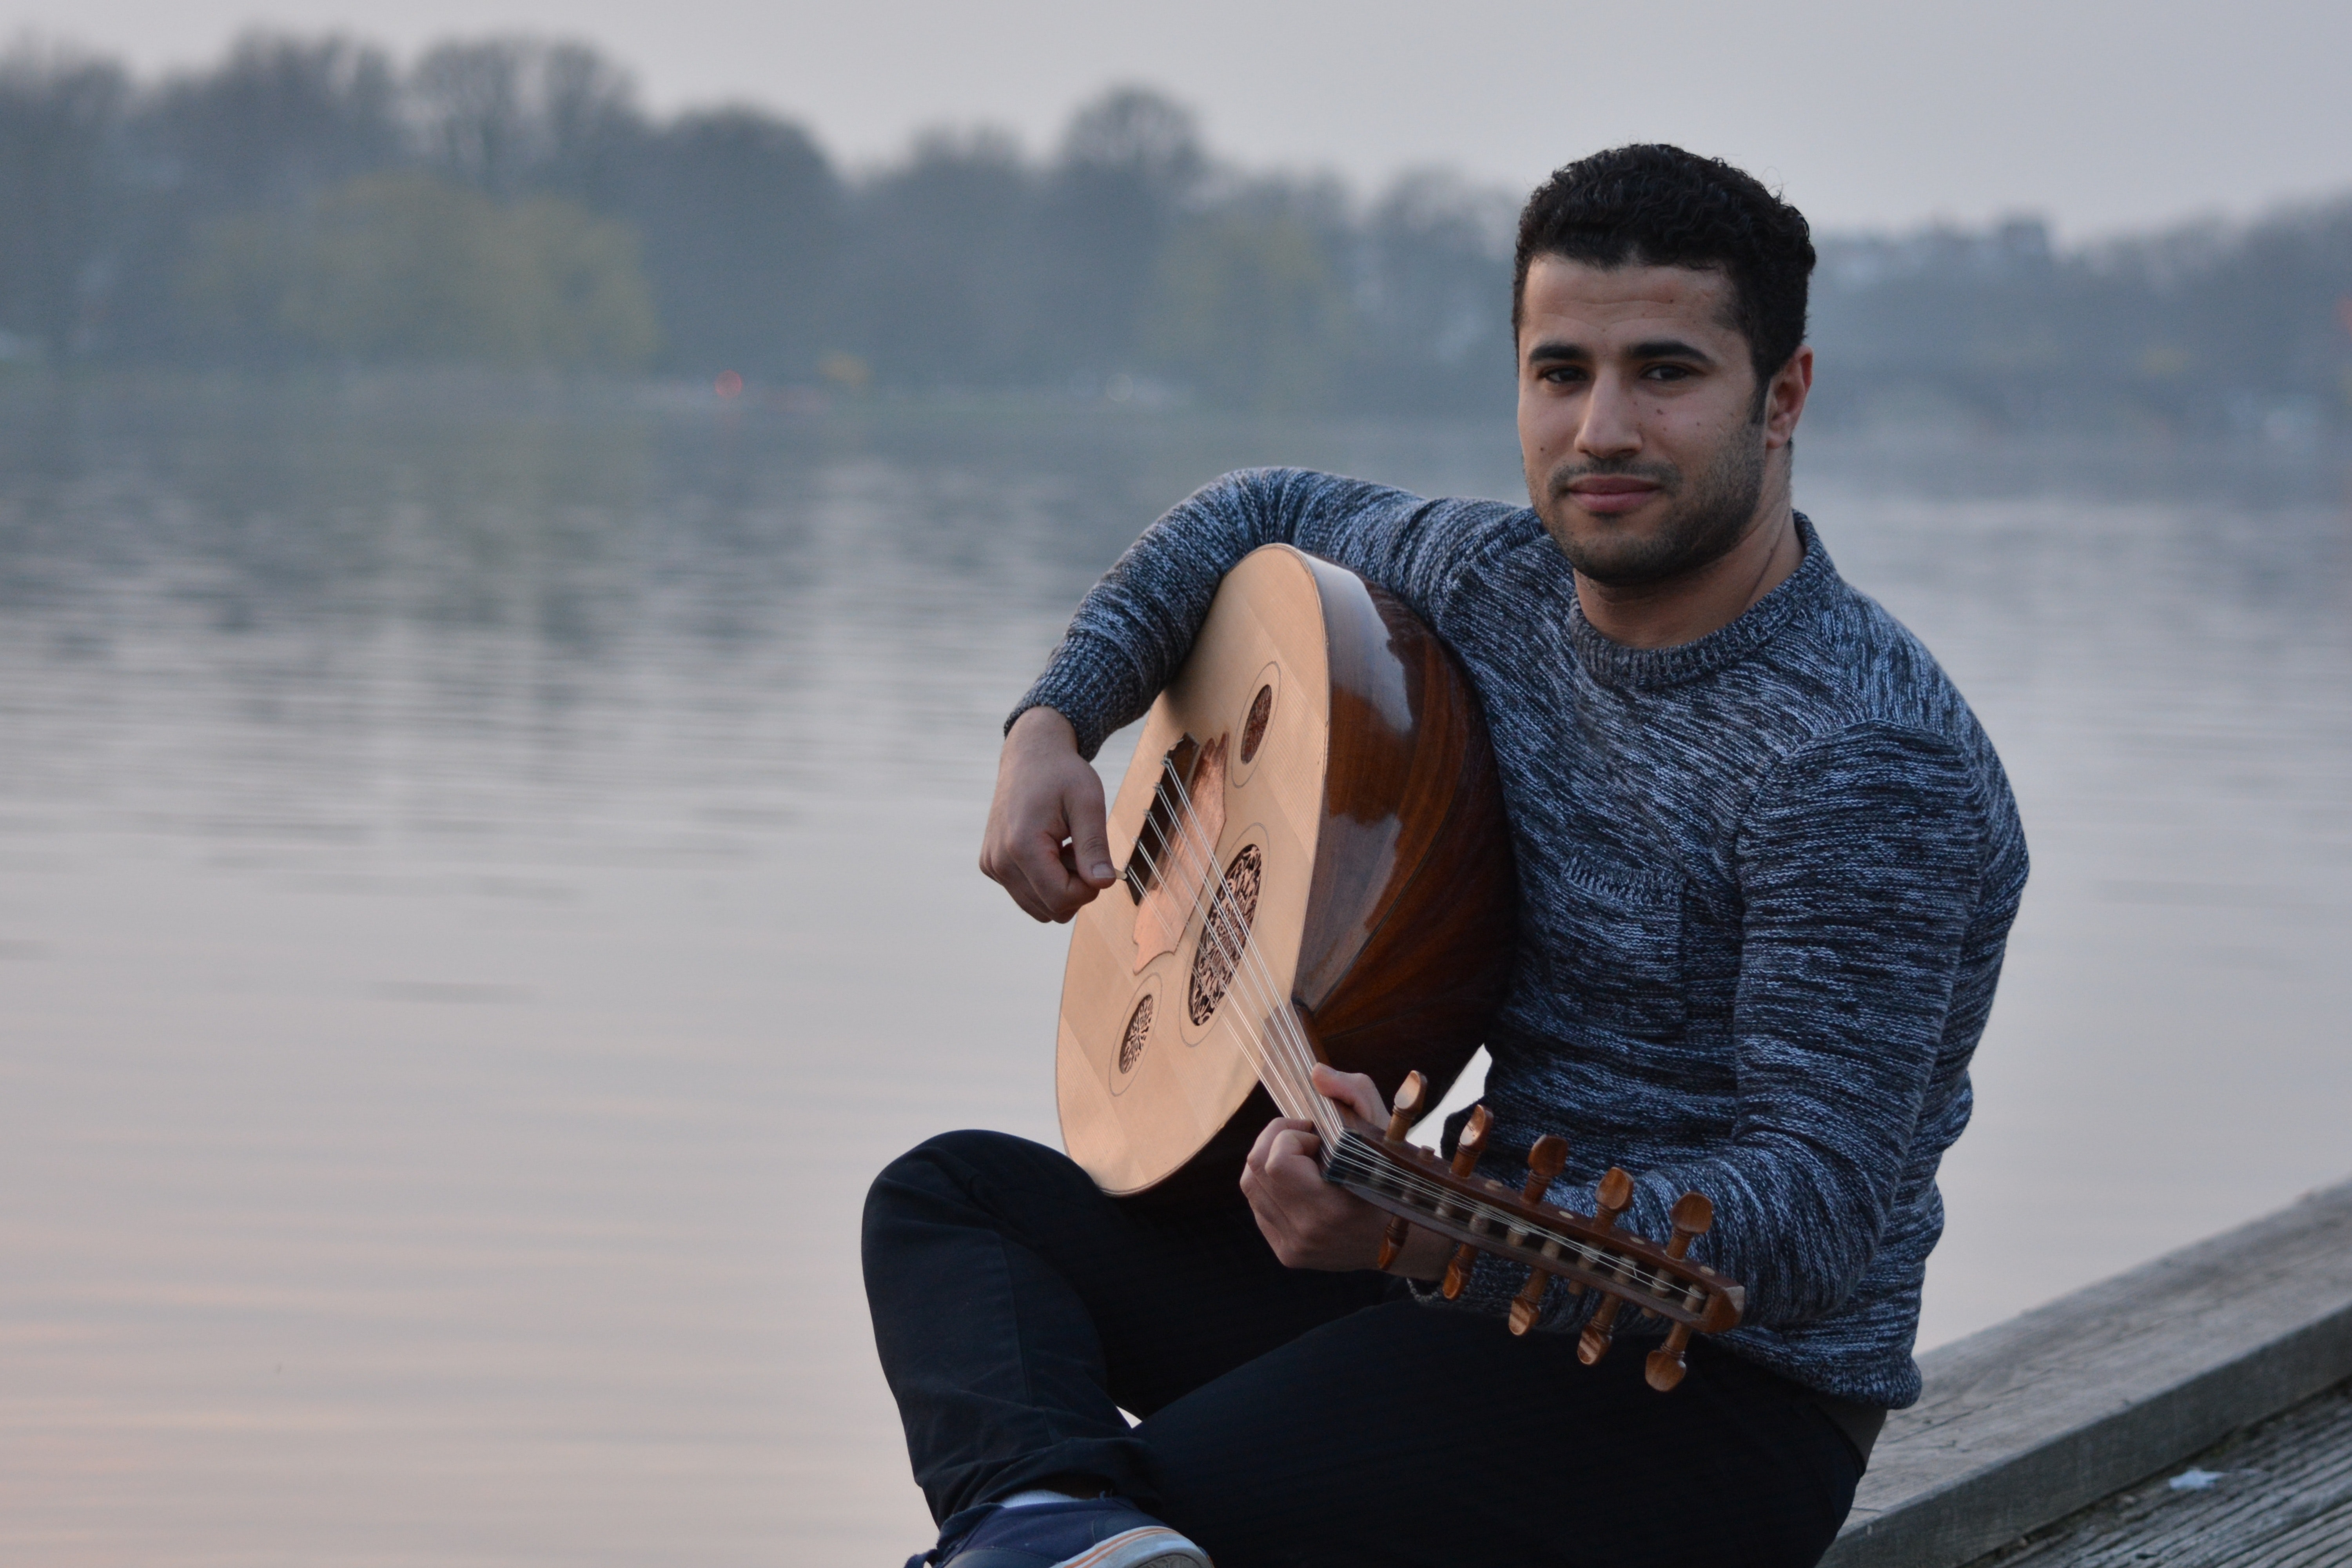 Man in gray crew neck sweatshirt and black pants sitting in gray concrete holding string instrument near body of water photo